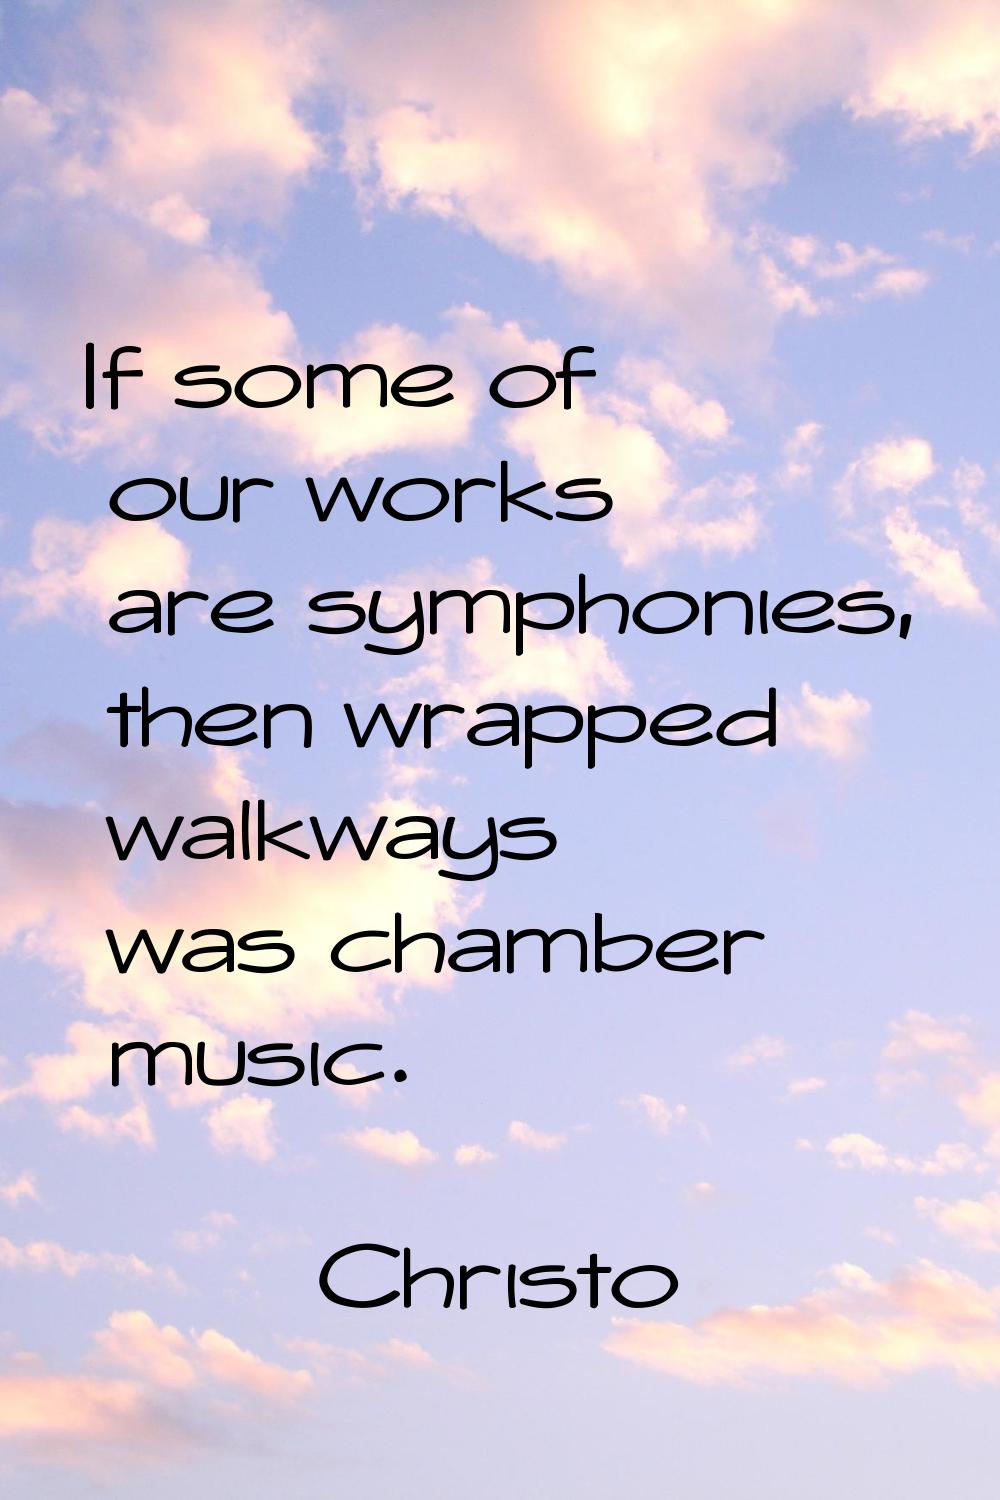 If some of our works are symphonies, then wrapped walkways was chamber music.